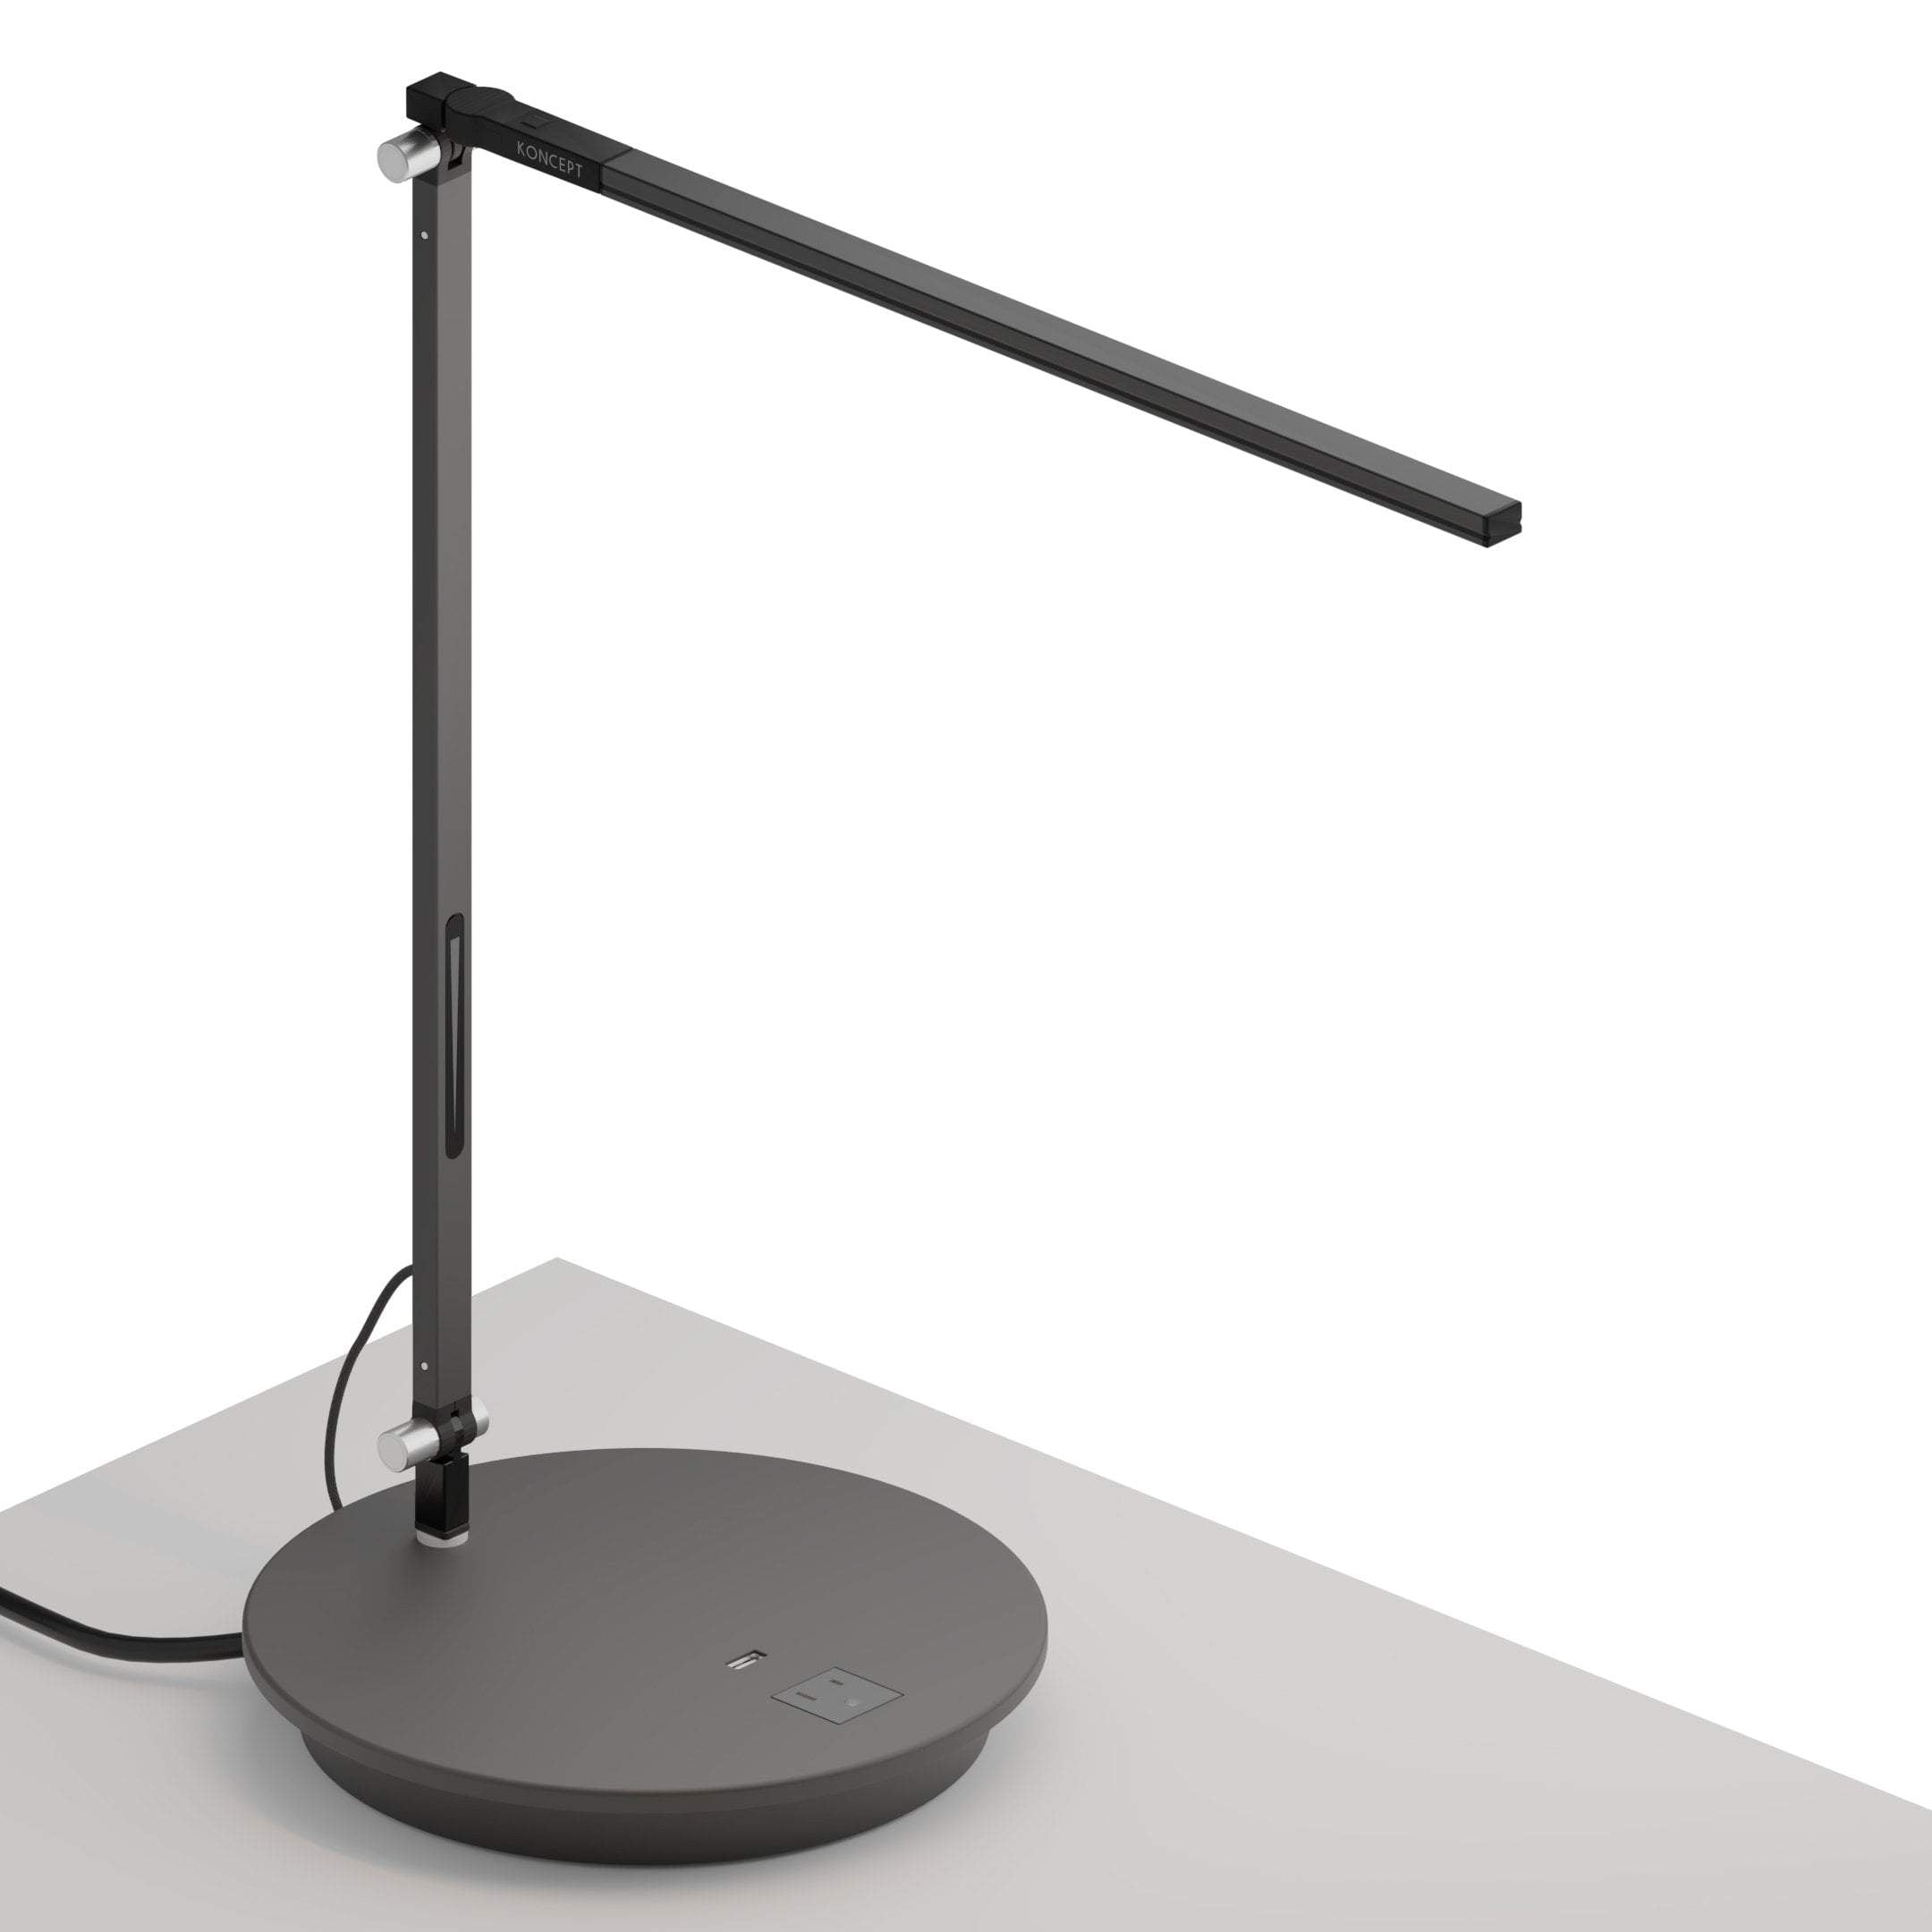 Koncept Desk Lamps Z-Bar Solo Desk Lamp with power base (USB and AC outlets) (Warm Light; Metallic Black)